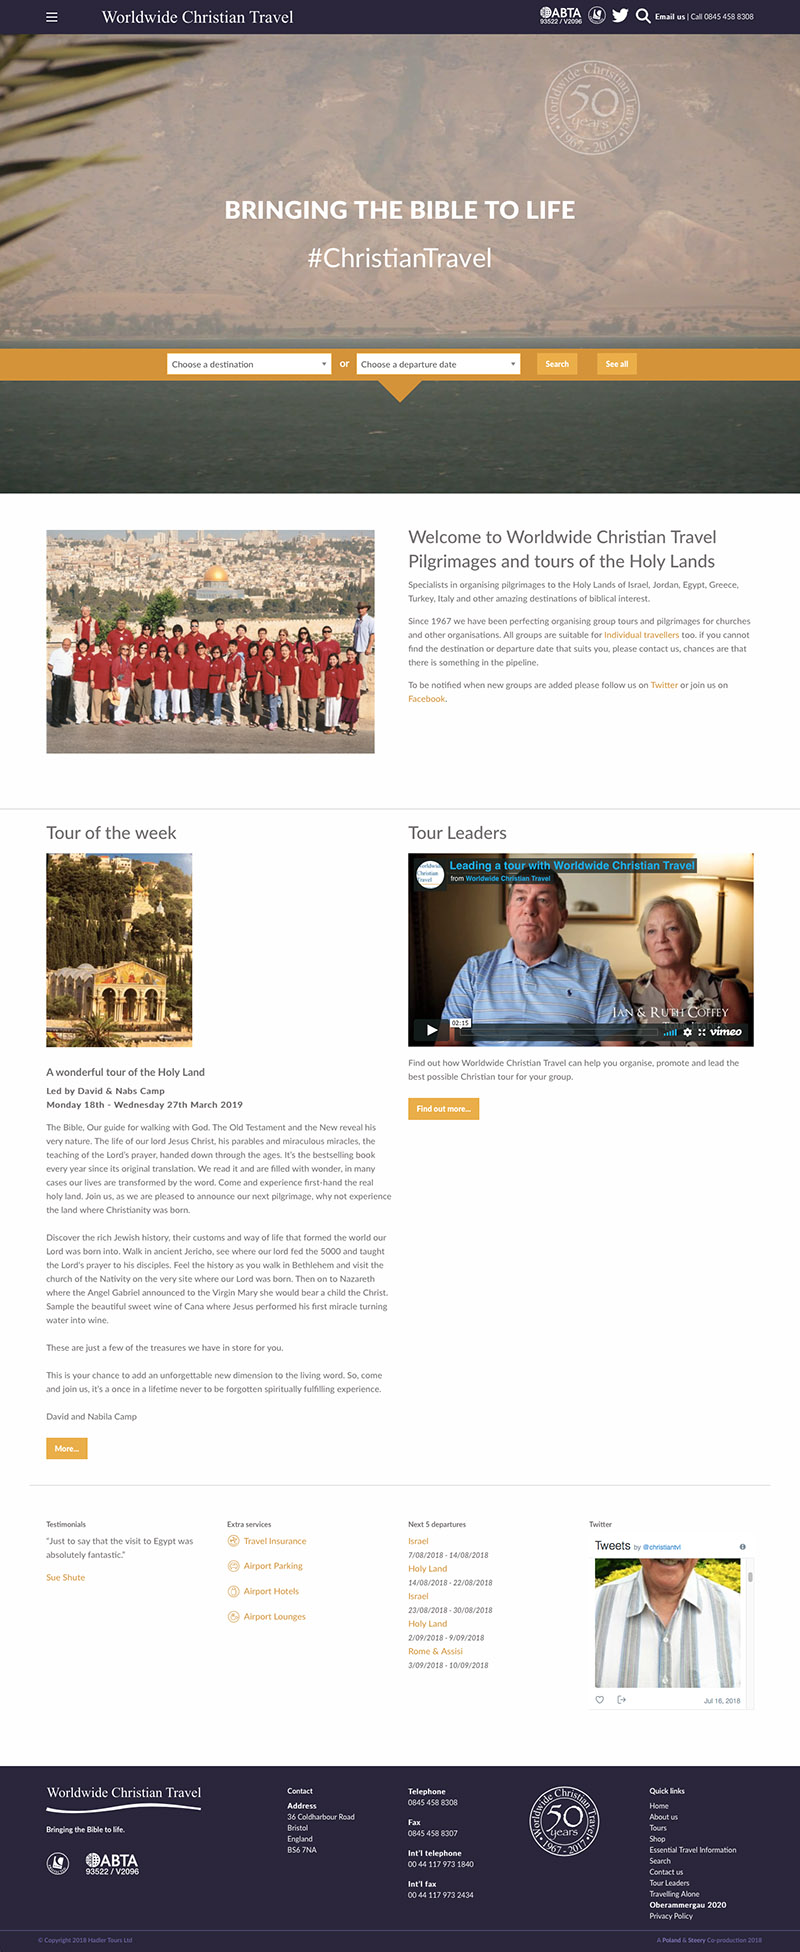 image of the Worldwide Christian Travel homepage